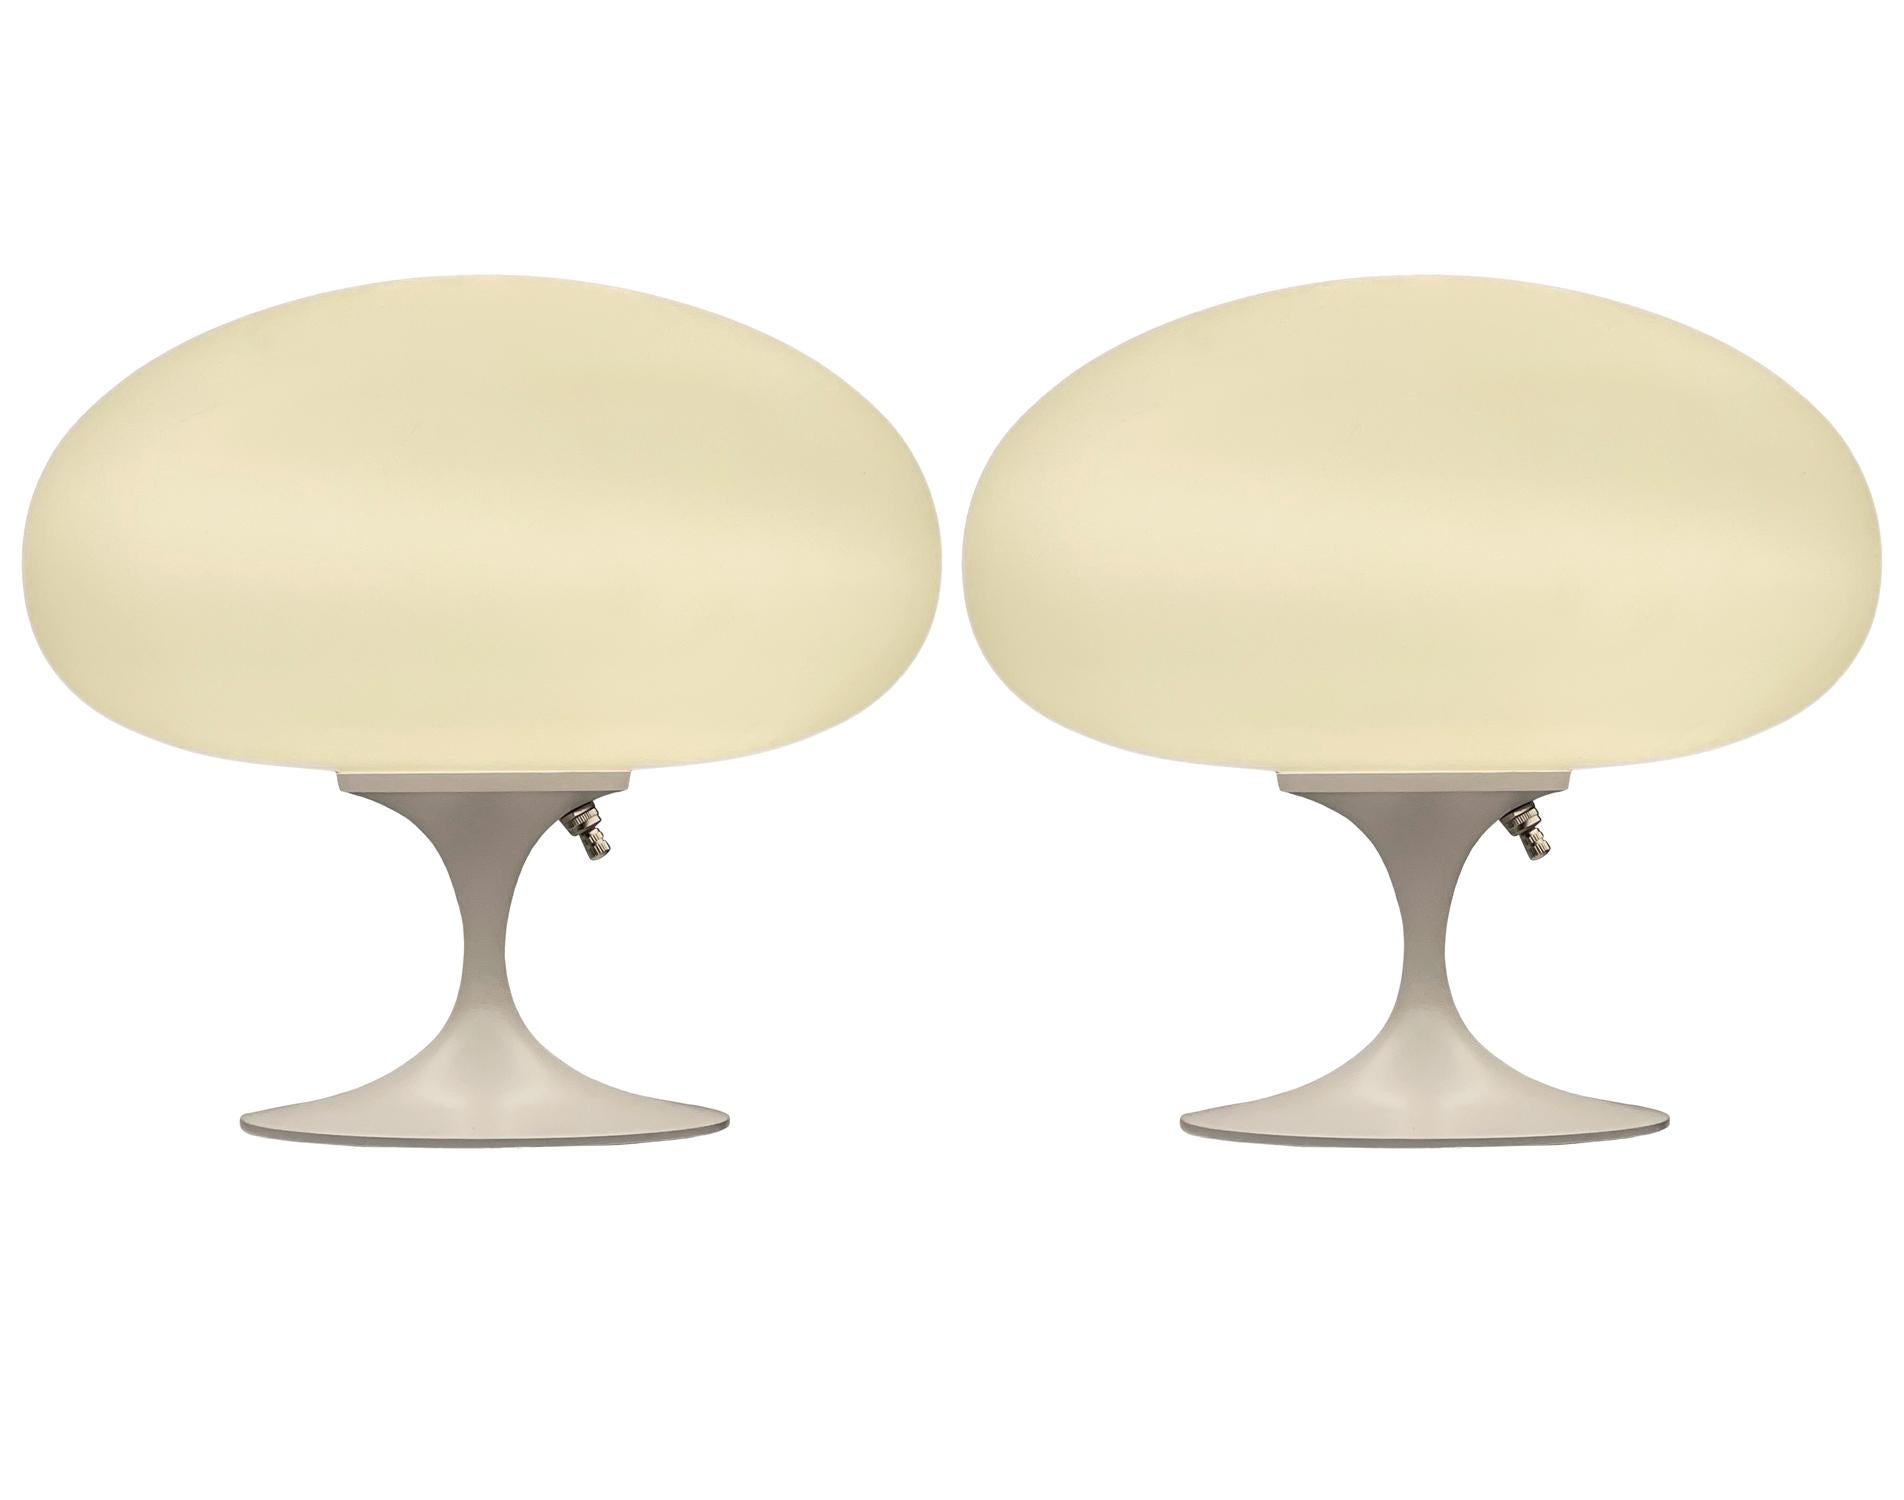 A gorgeous matching pair of tulip form table lamps after Laurel Lamp Company These feature white powder coated cast aluminum bases with mouth blown frosted white glass shades. The price includes the pair as shown.